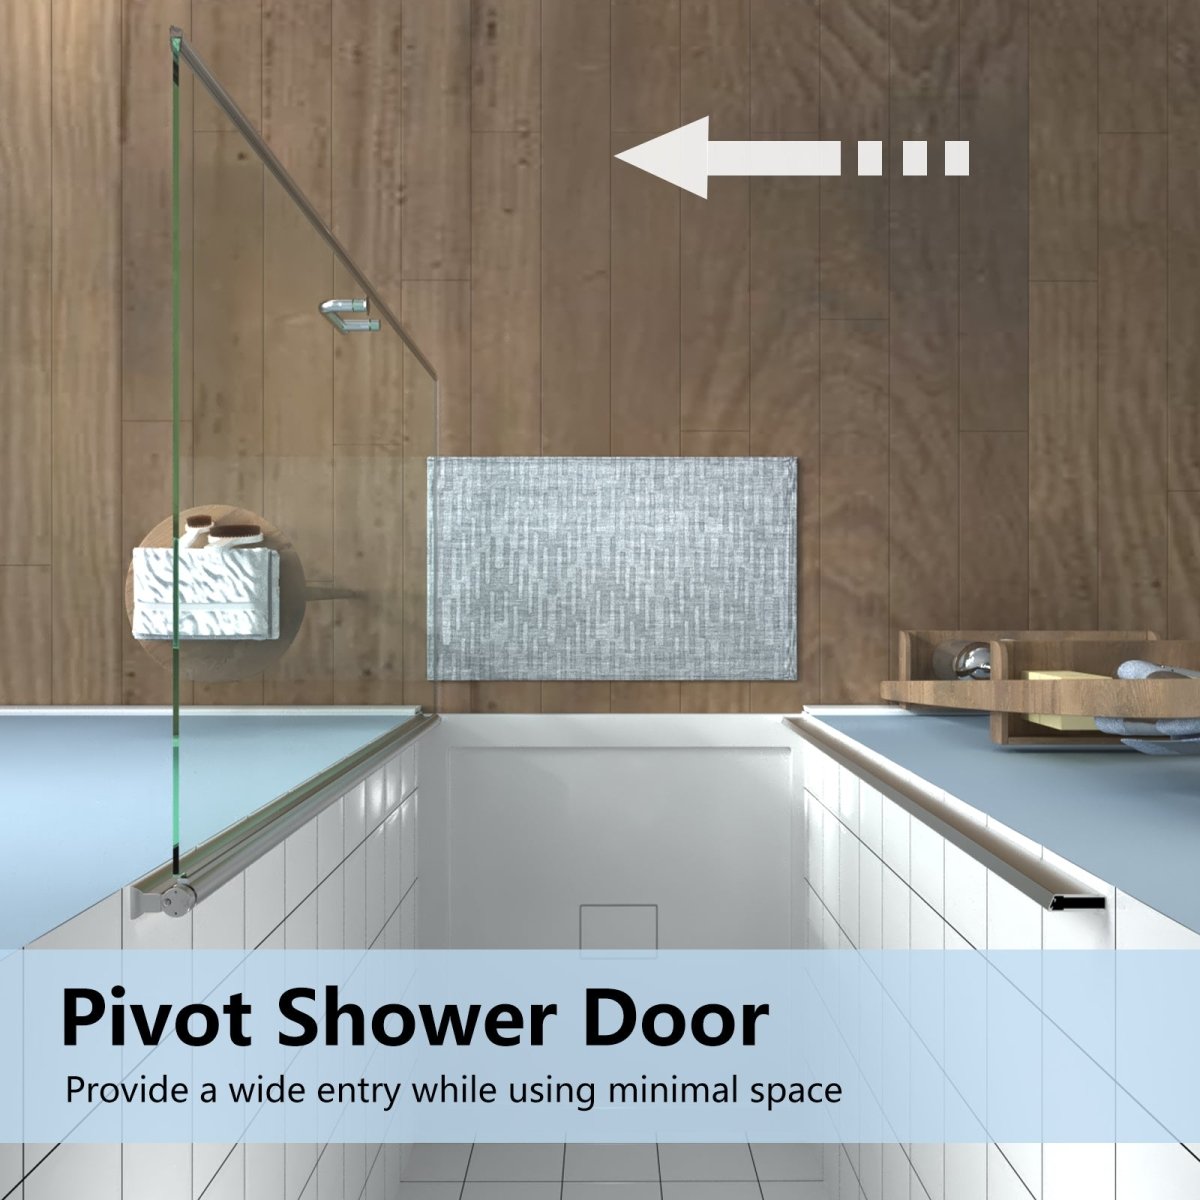 Classy 24-25 1/2" W x 72" H Small Shower Door Hinged Pivot Chrome Install Clear Glass Shower Door